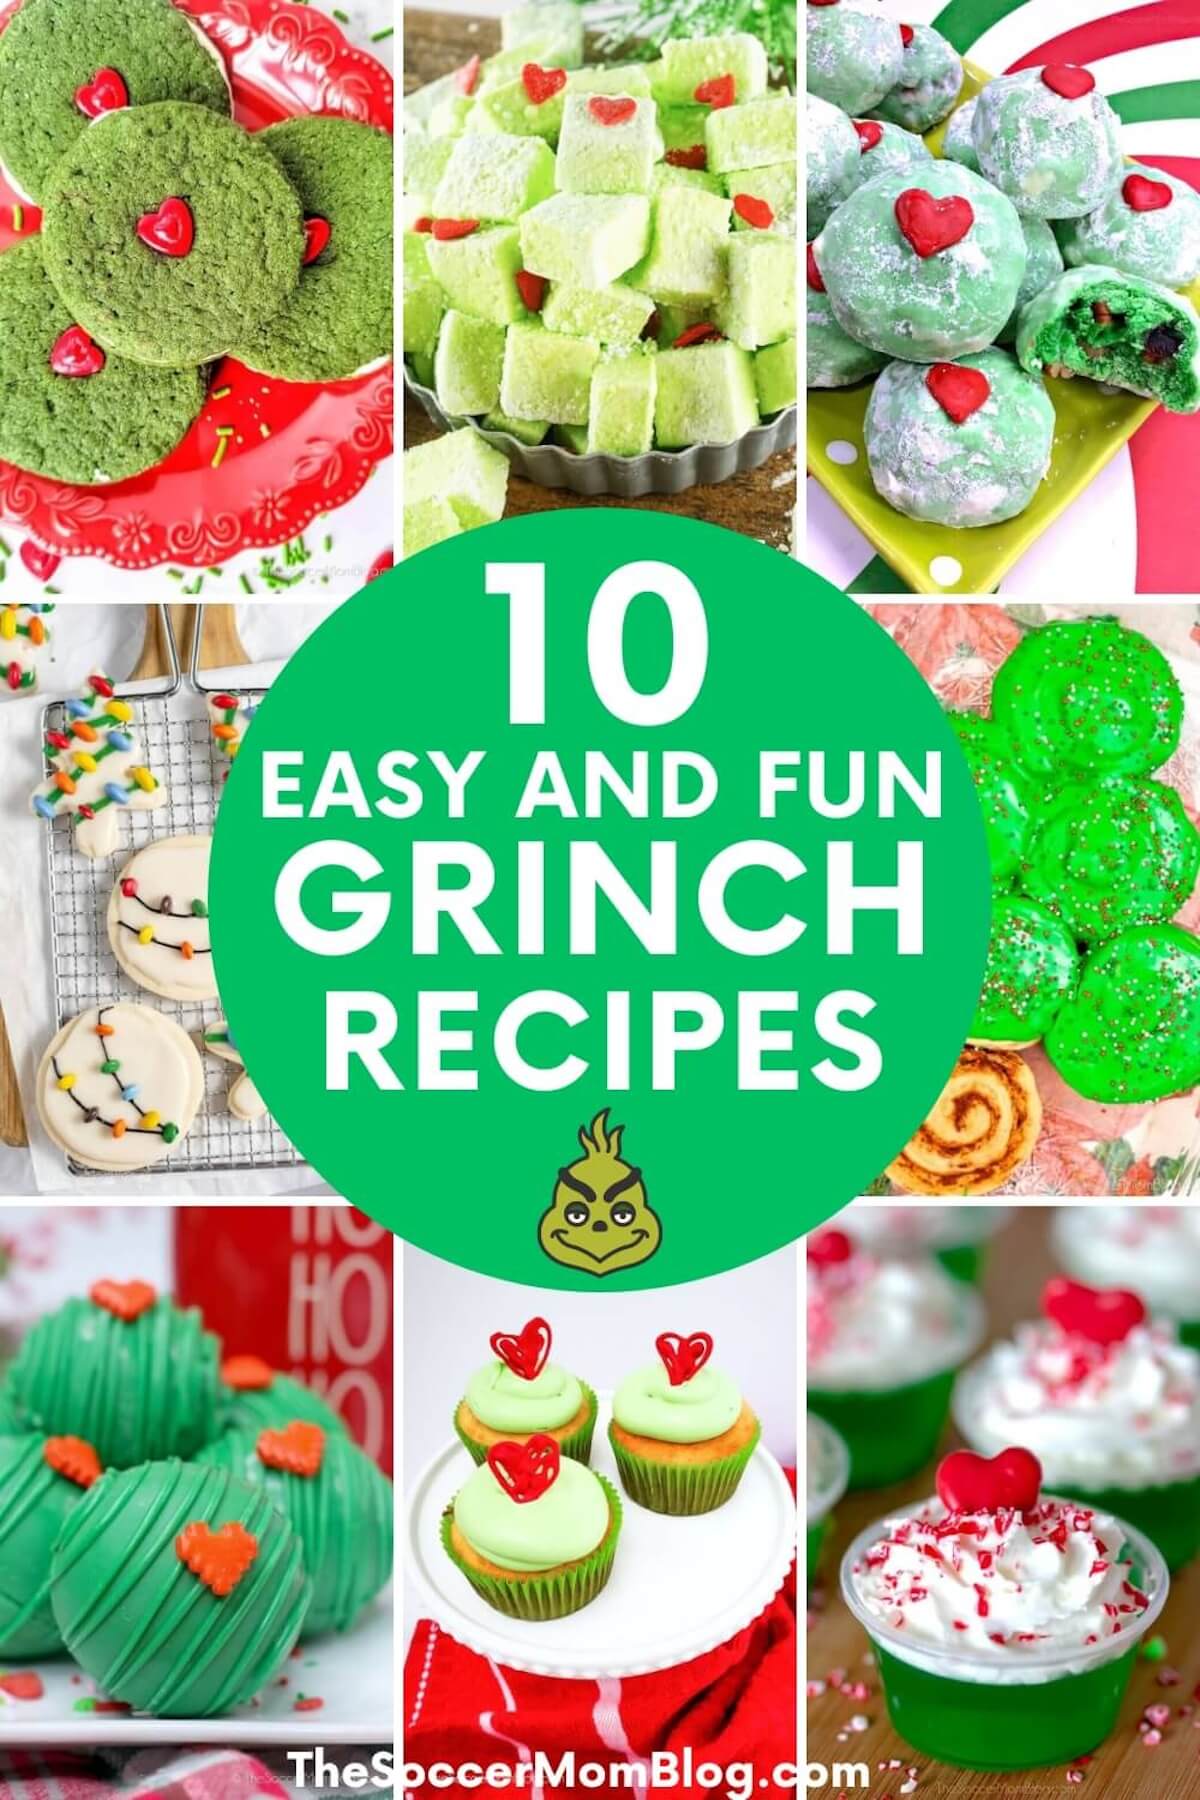 photo collage of green Grinch-inspired recipes with text overlay "10 Easy and Fun Grinch Recipes".